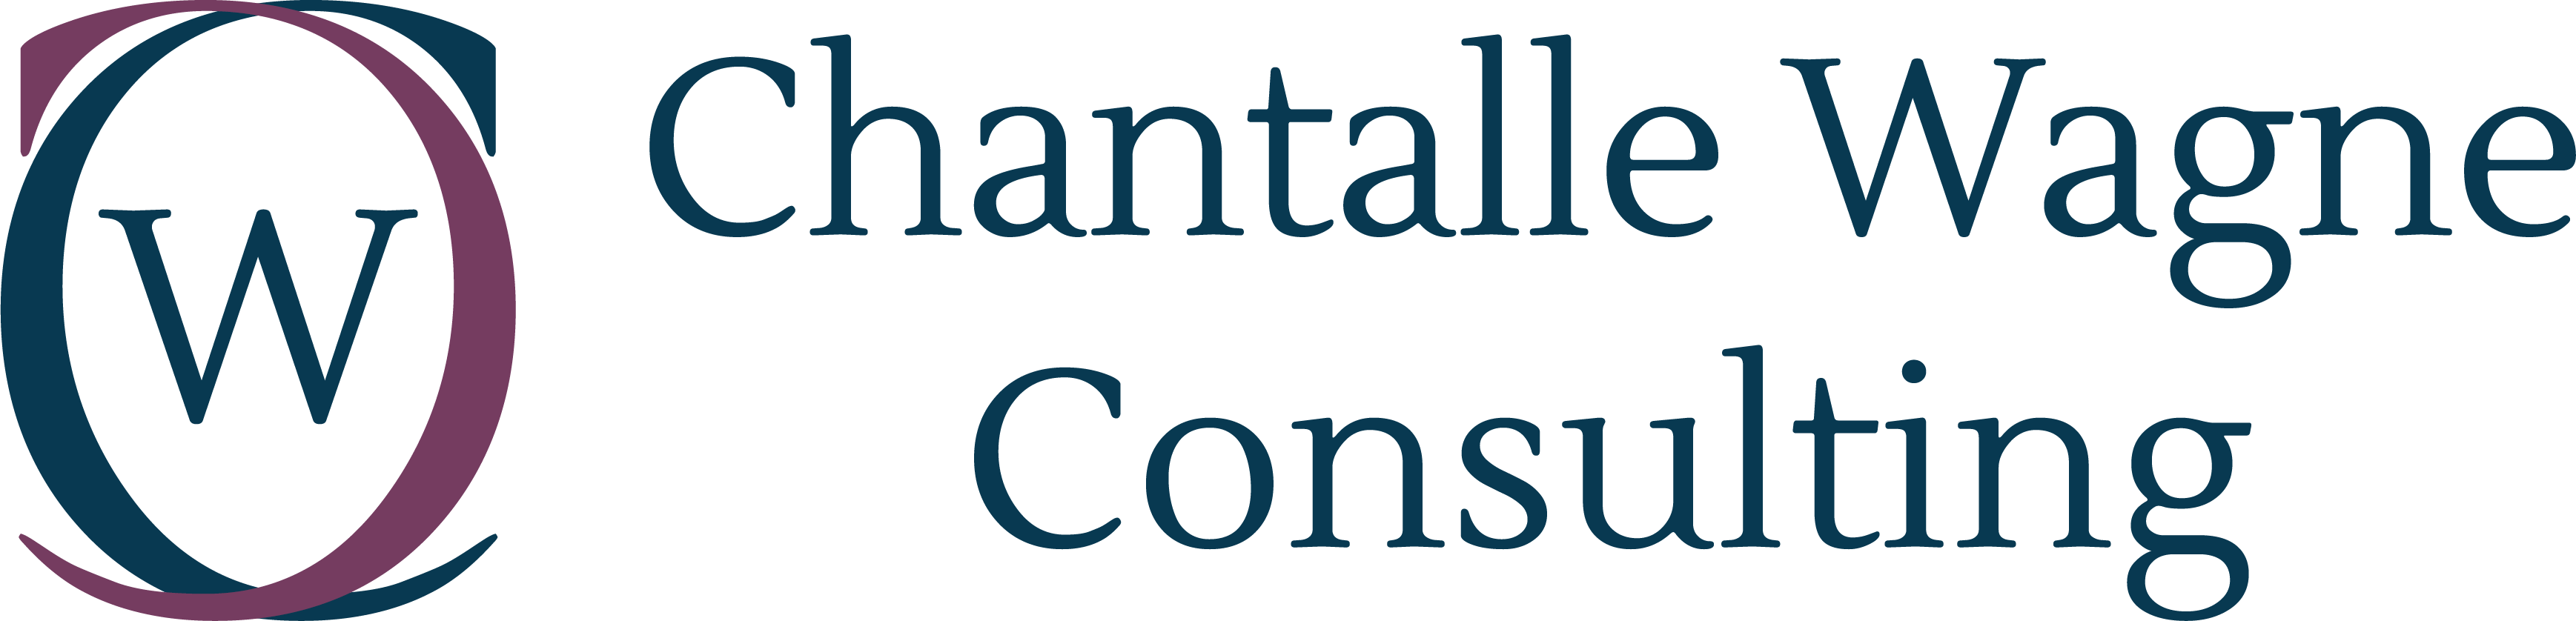 Chantalle Wagne Consulting